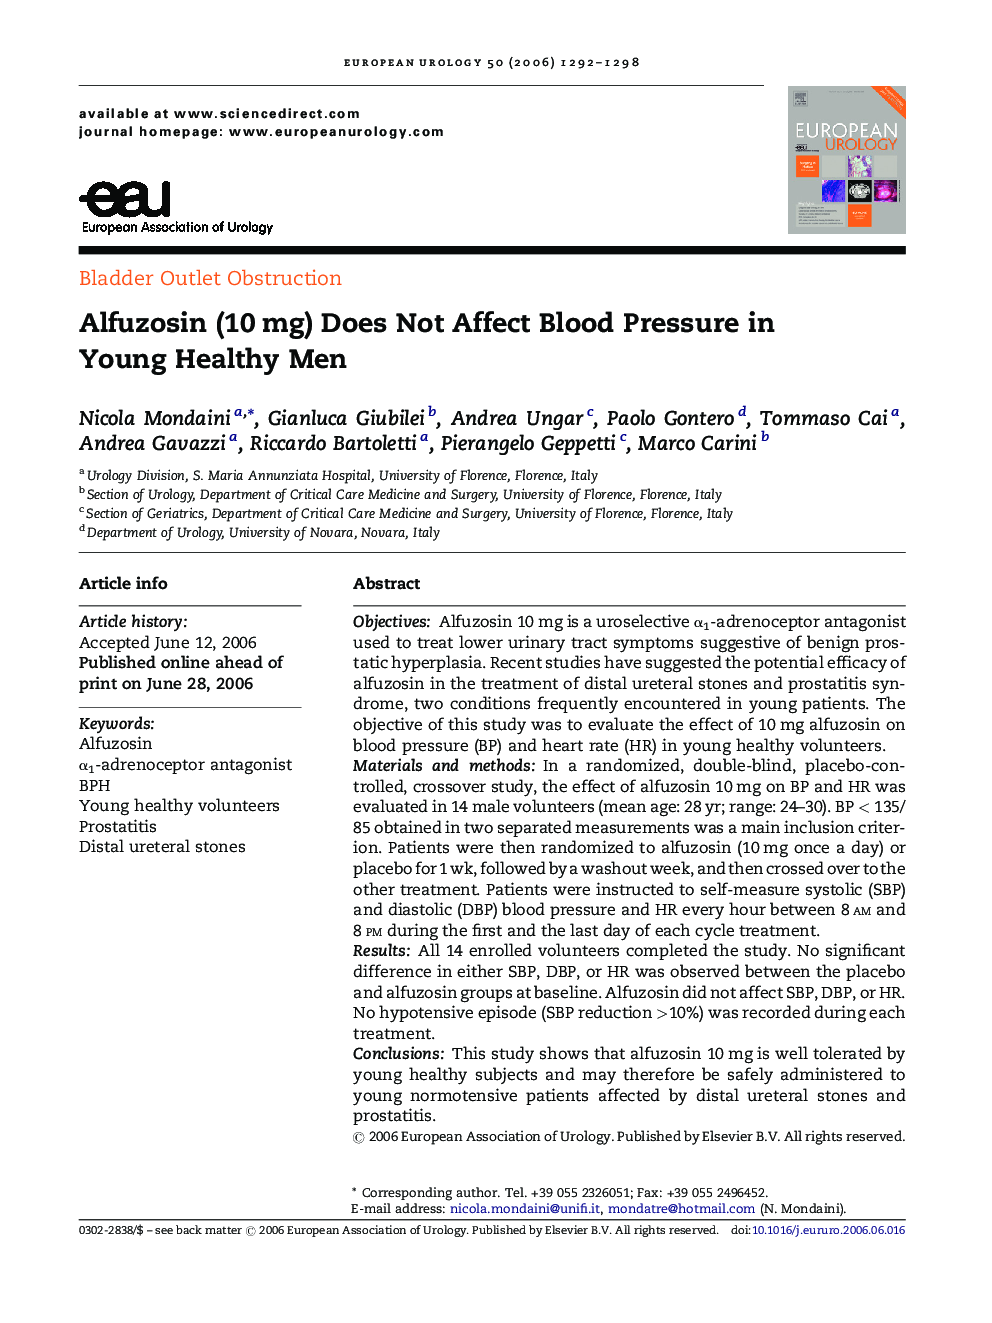 Alfuzosin (10 mg) Does Not Affect Blood Pressure in Young Healthy Men